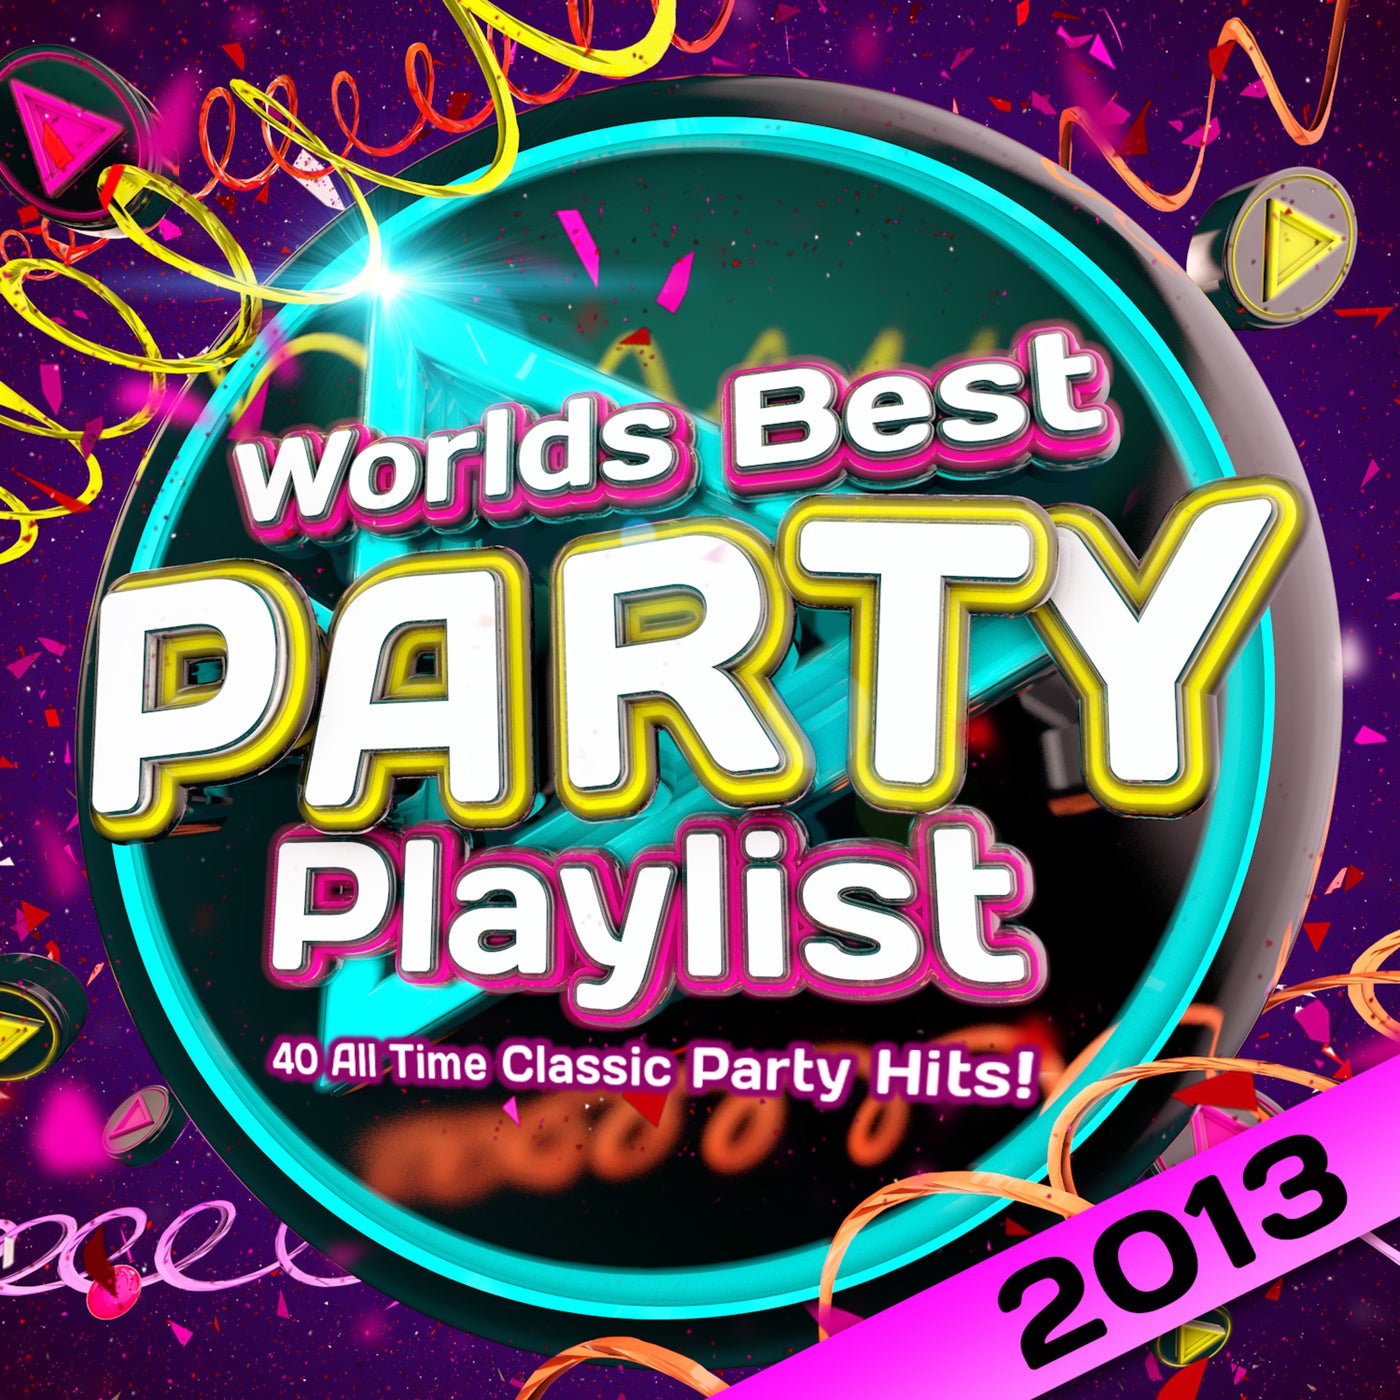 Dance Hits 2010 – 2020 – Essential Club Anthems – 35 Massive Hits - The  Very Best Of EDM, Ibiza & House - Compilation by Various Artists